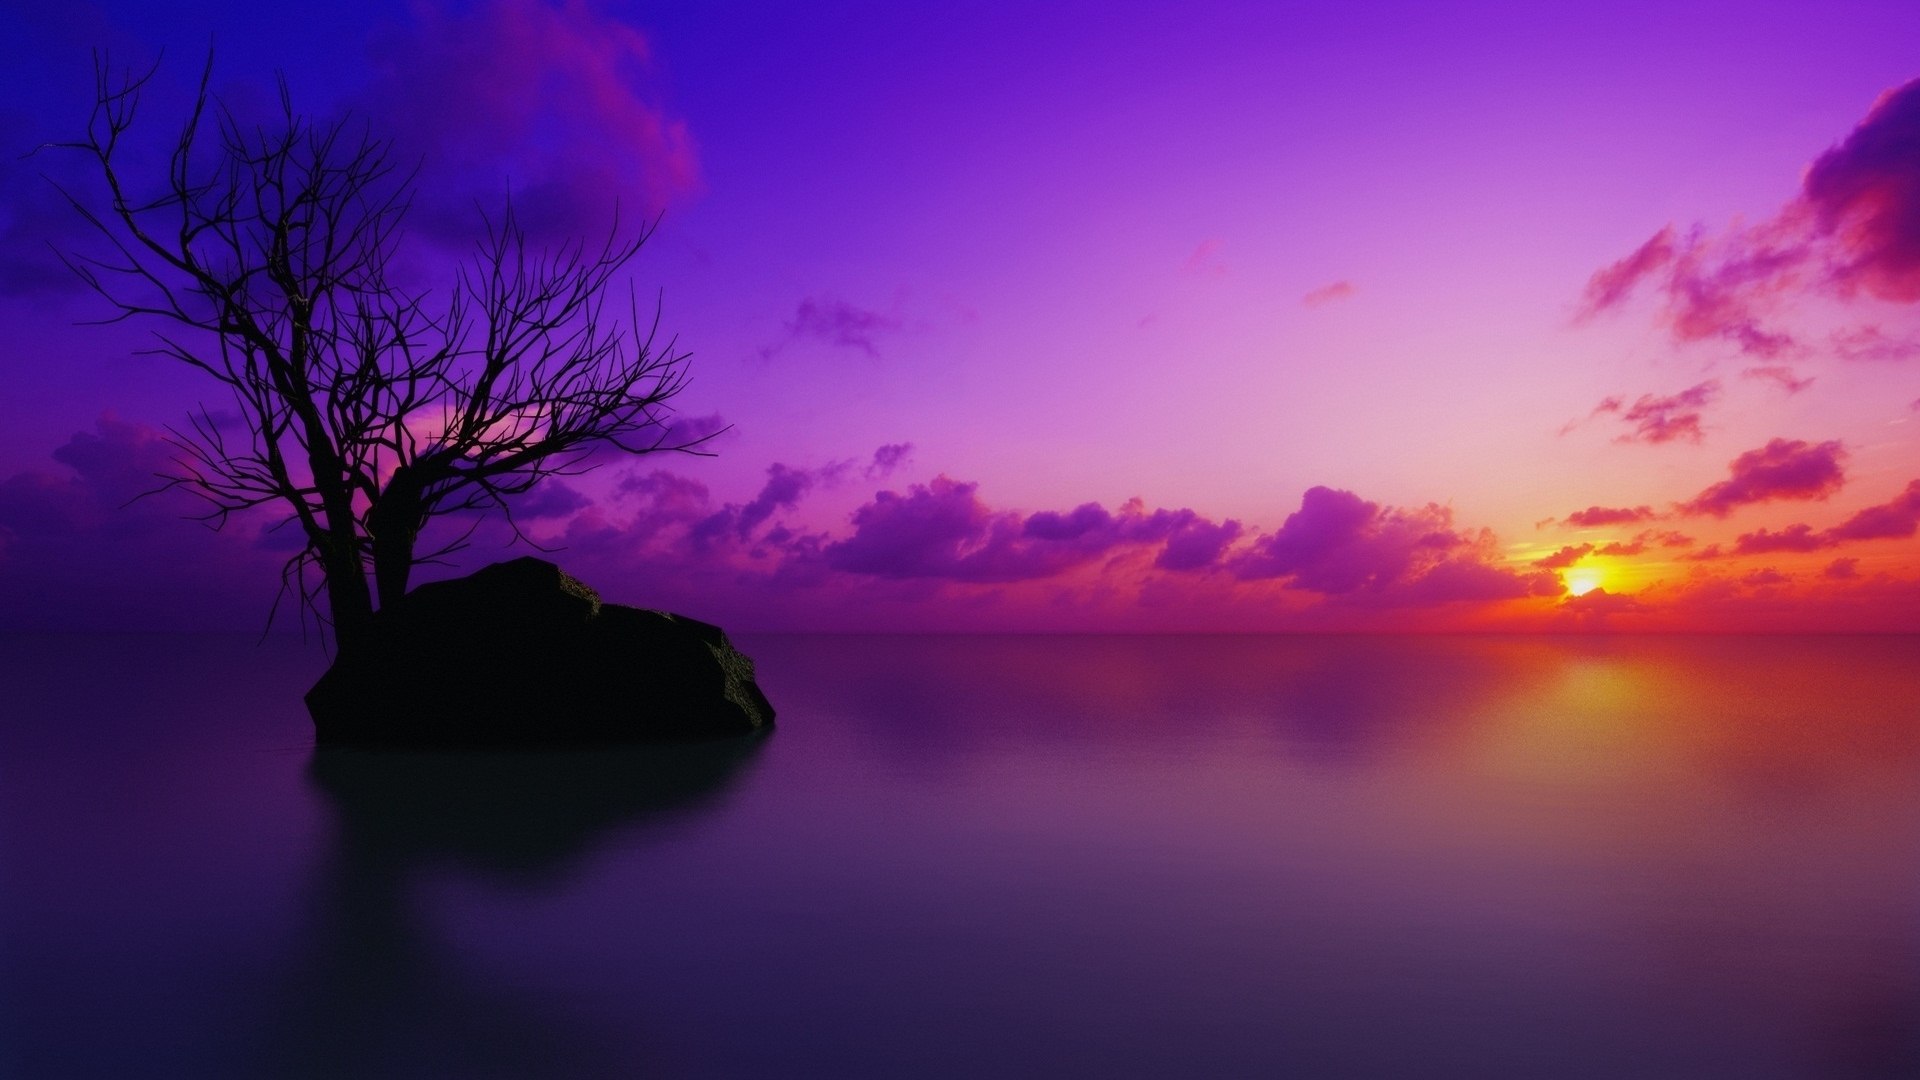 Sunset wallpaper 1920x1080 - (#27664) - High Quality and ...